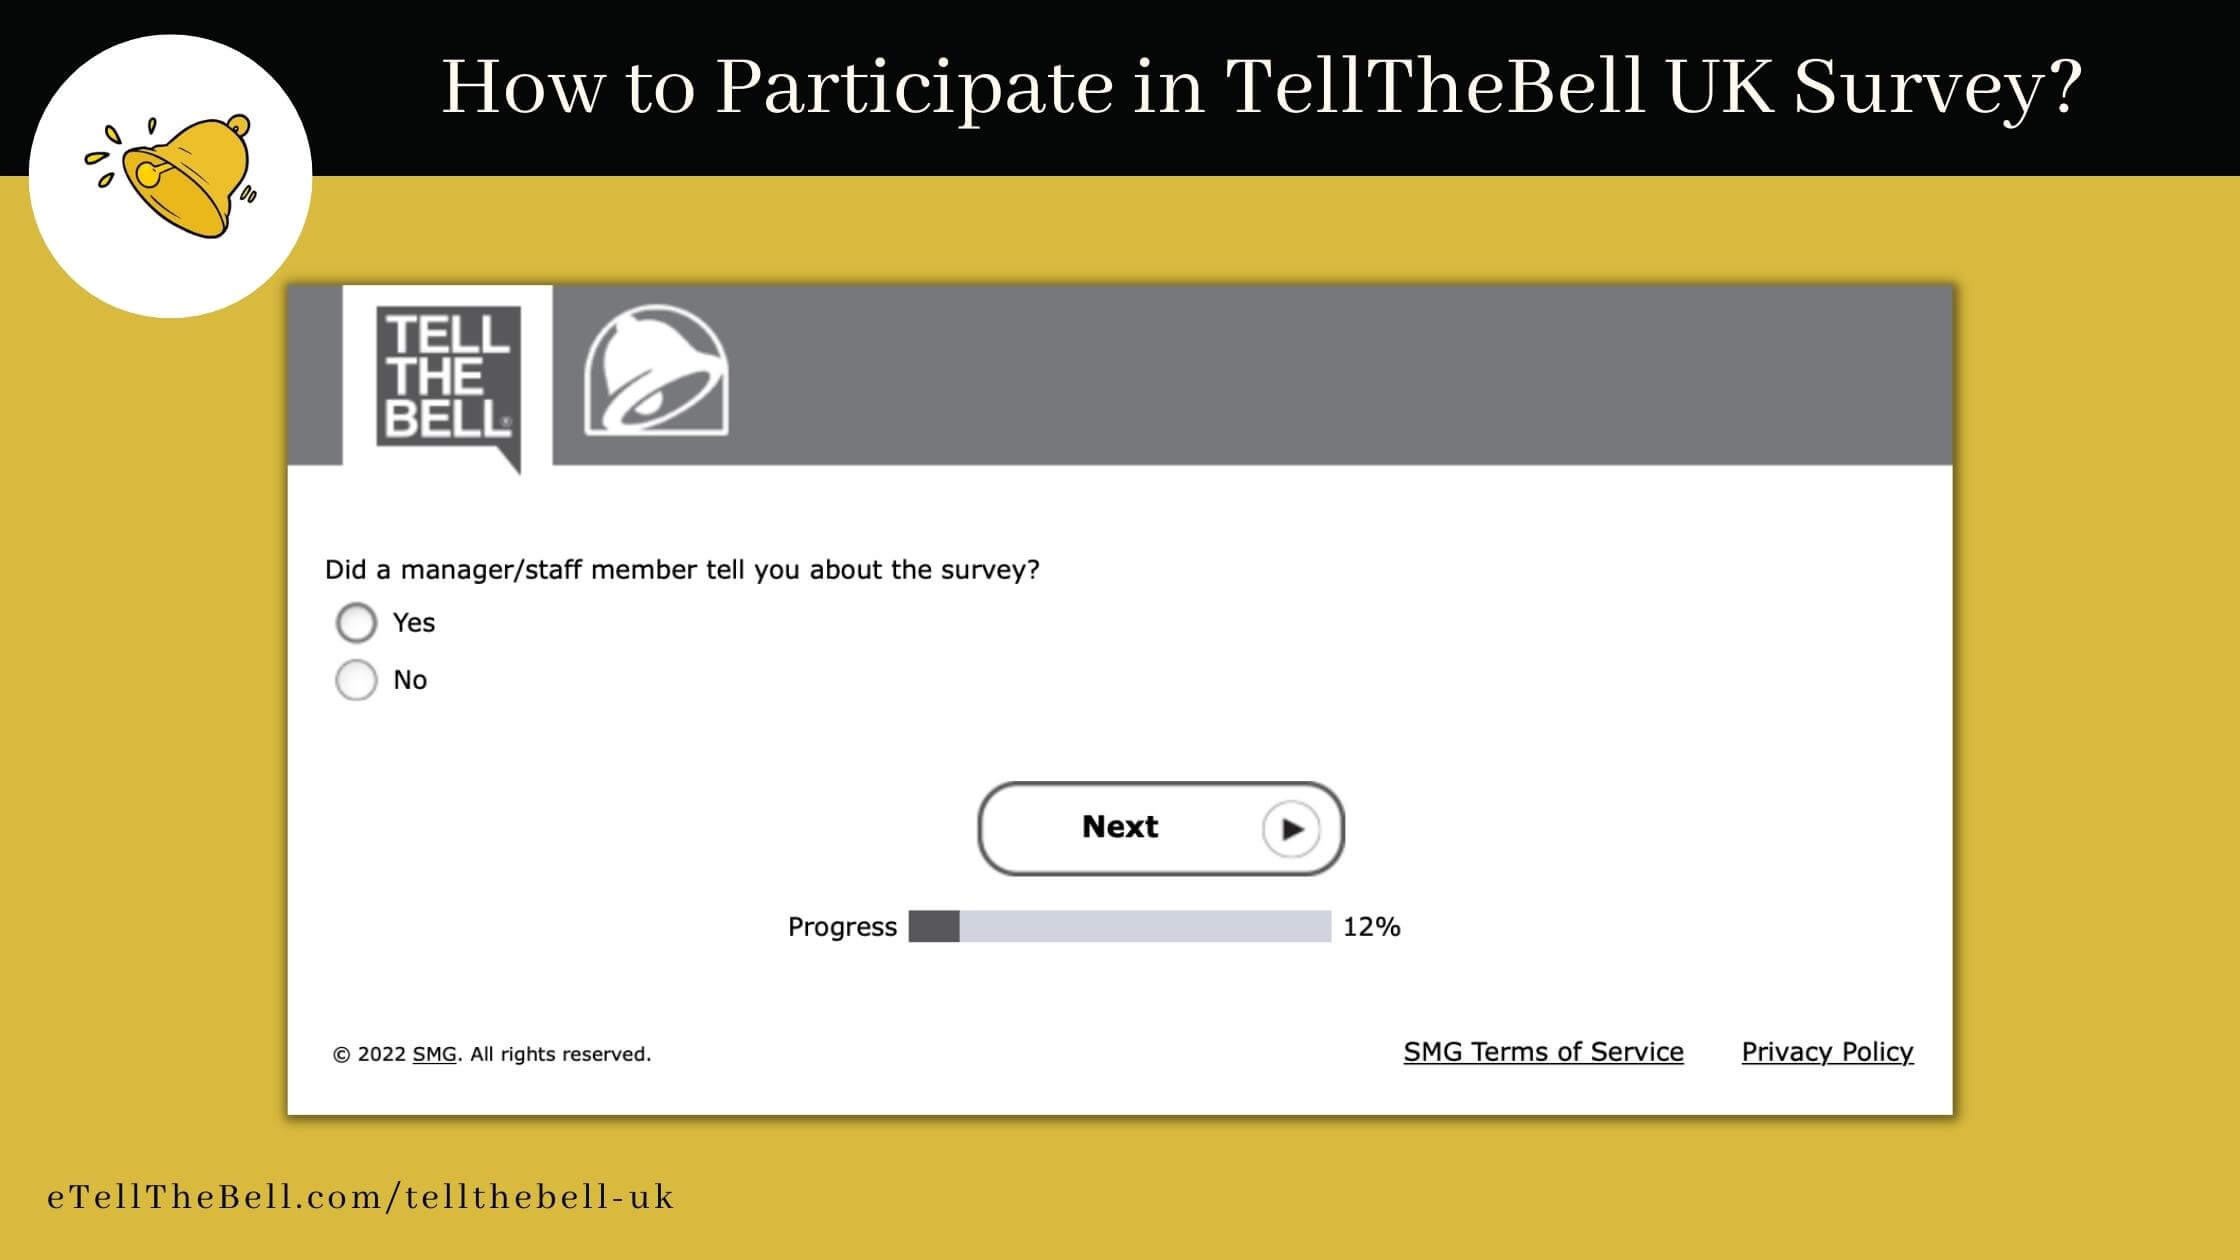 Did a manager_staff member tell you about TellTheBell UK survey